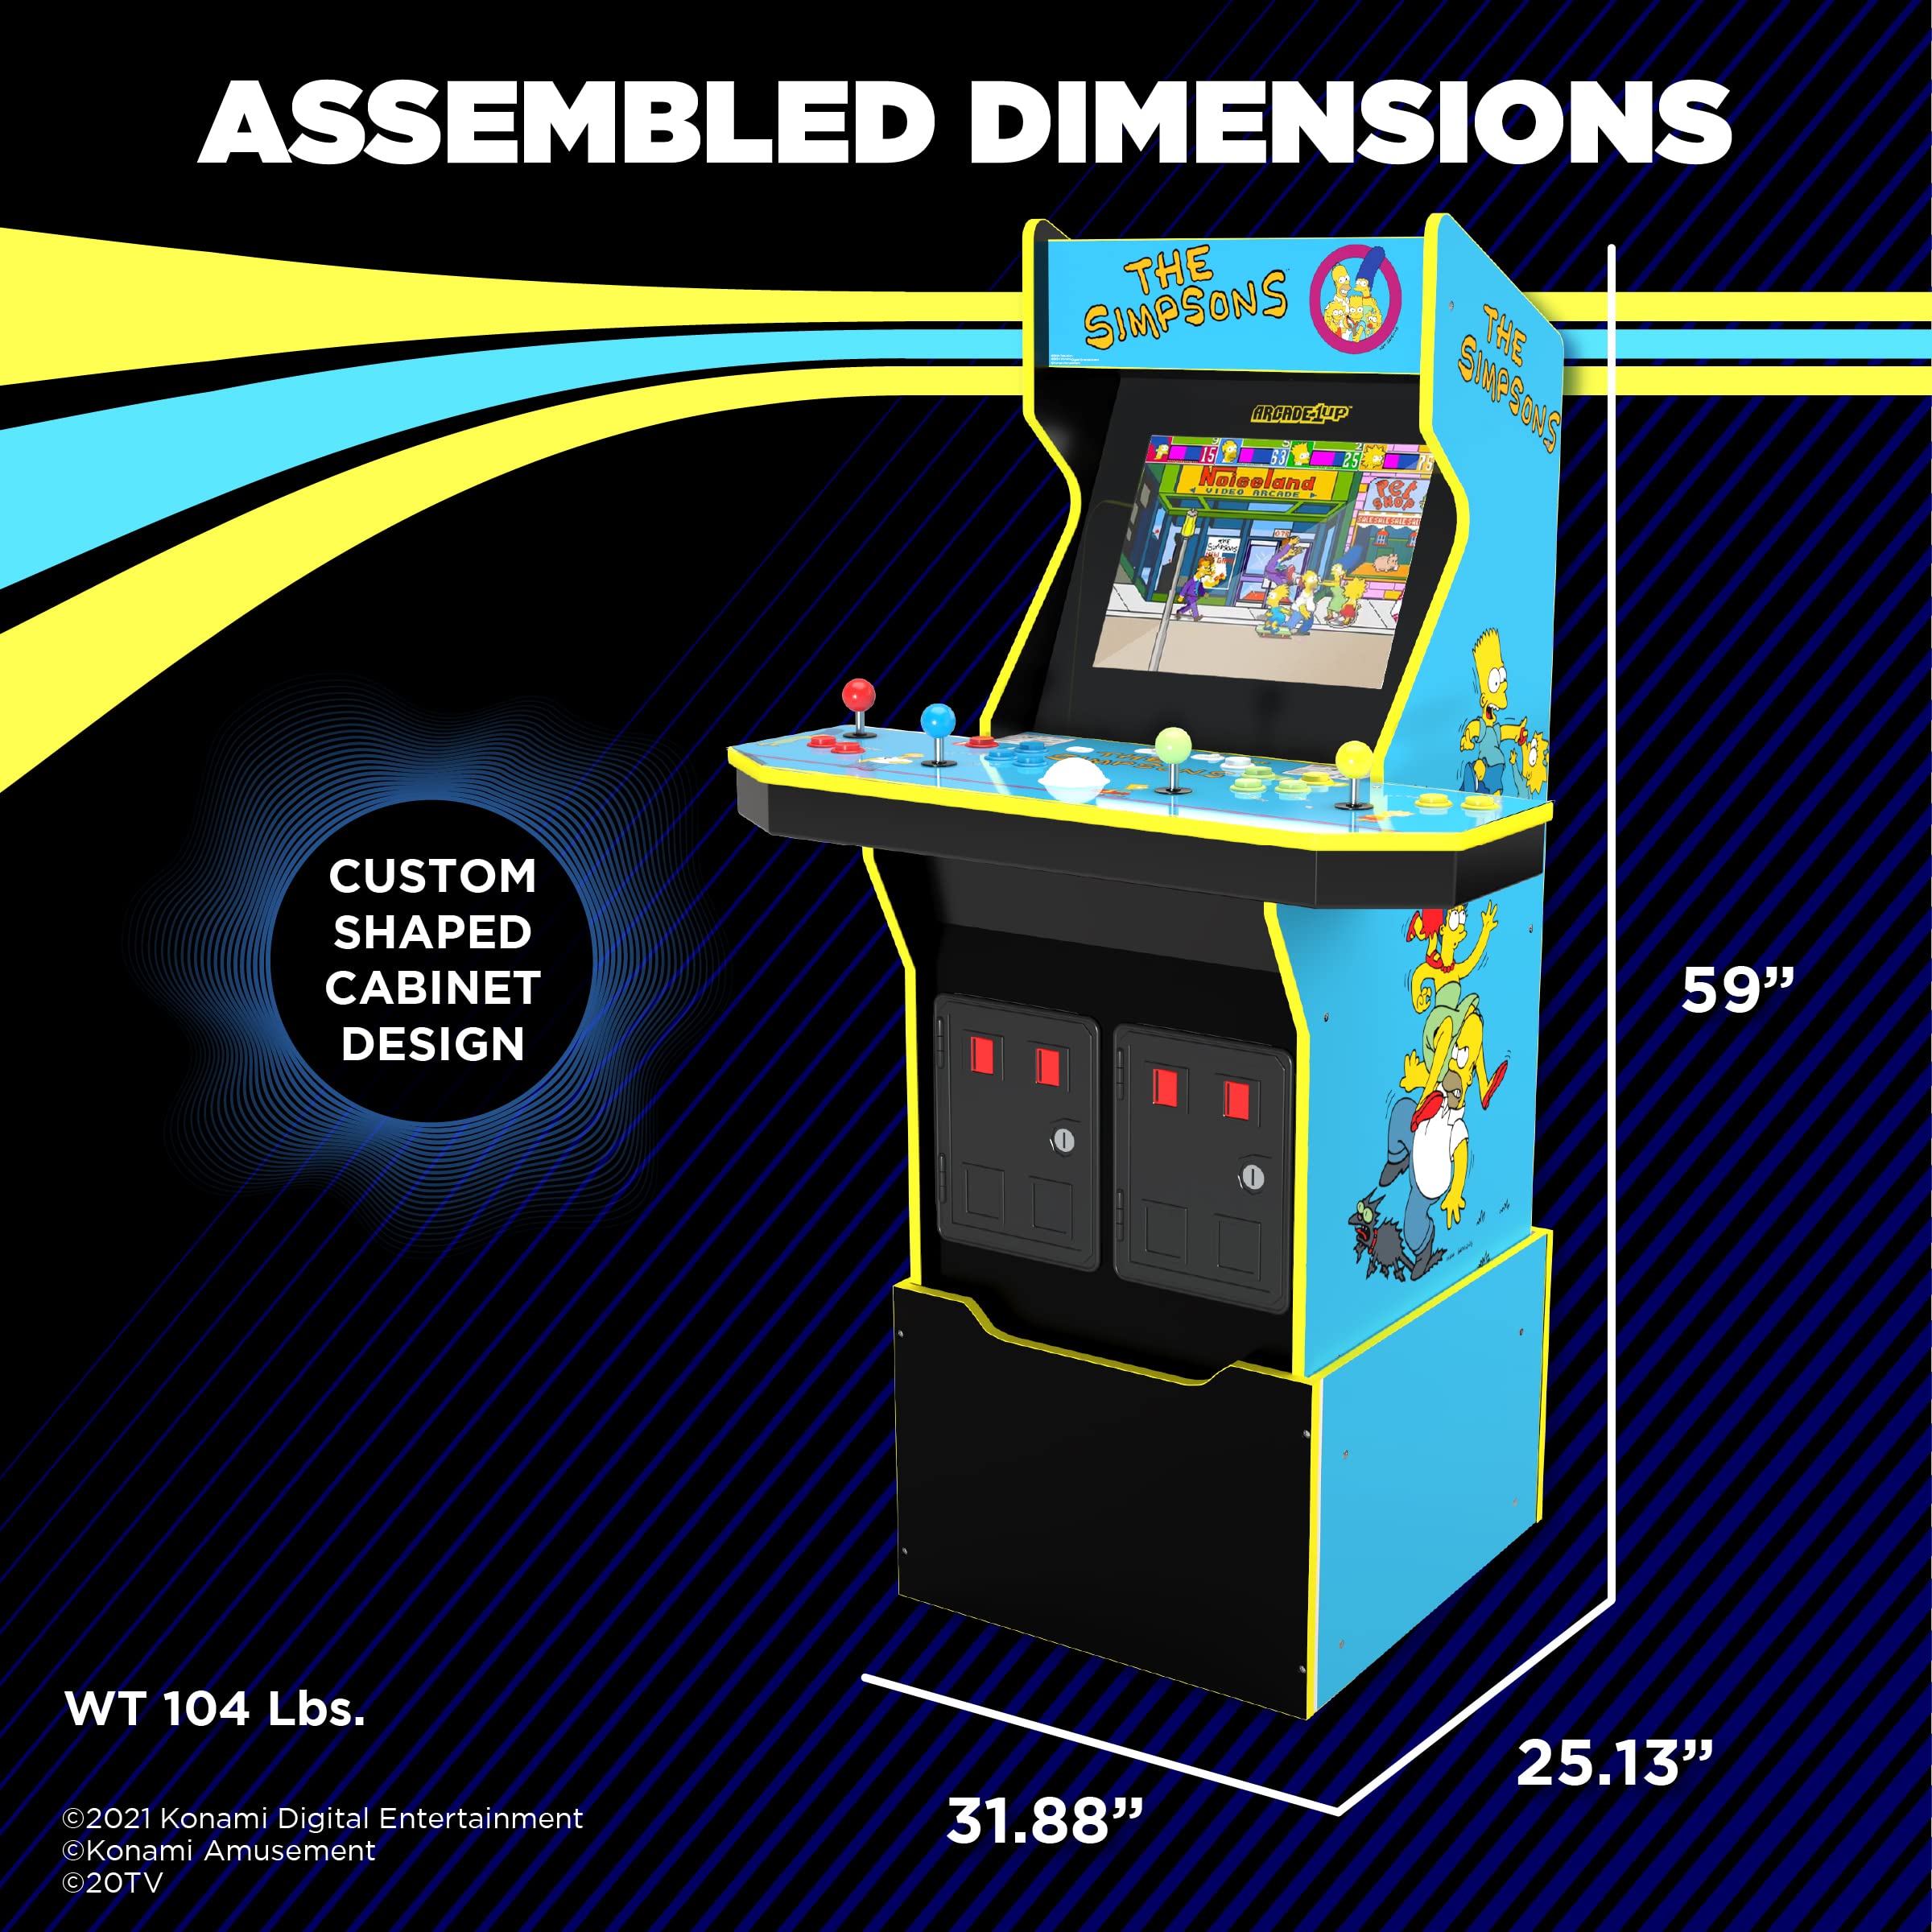 Arcade1Up The Simpsons Arcade Machine, 4-Foot — 4 Player Arcade Game Machine for Home, Live WiFi Enabled — Includes Custom Arcade Game Riser, Adjustable Stool, Light-Up Marquee, and Tin Wall Sign